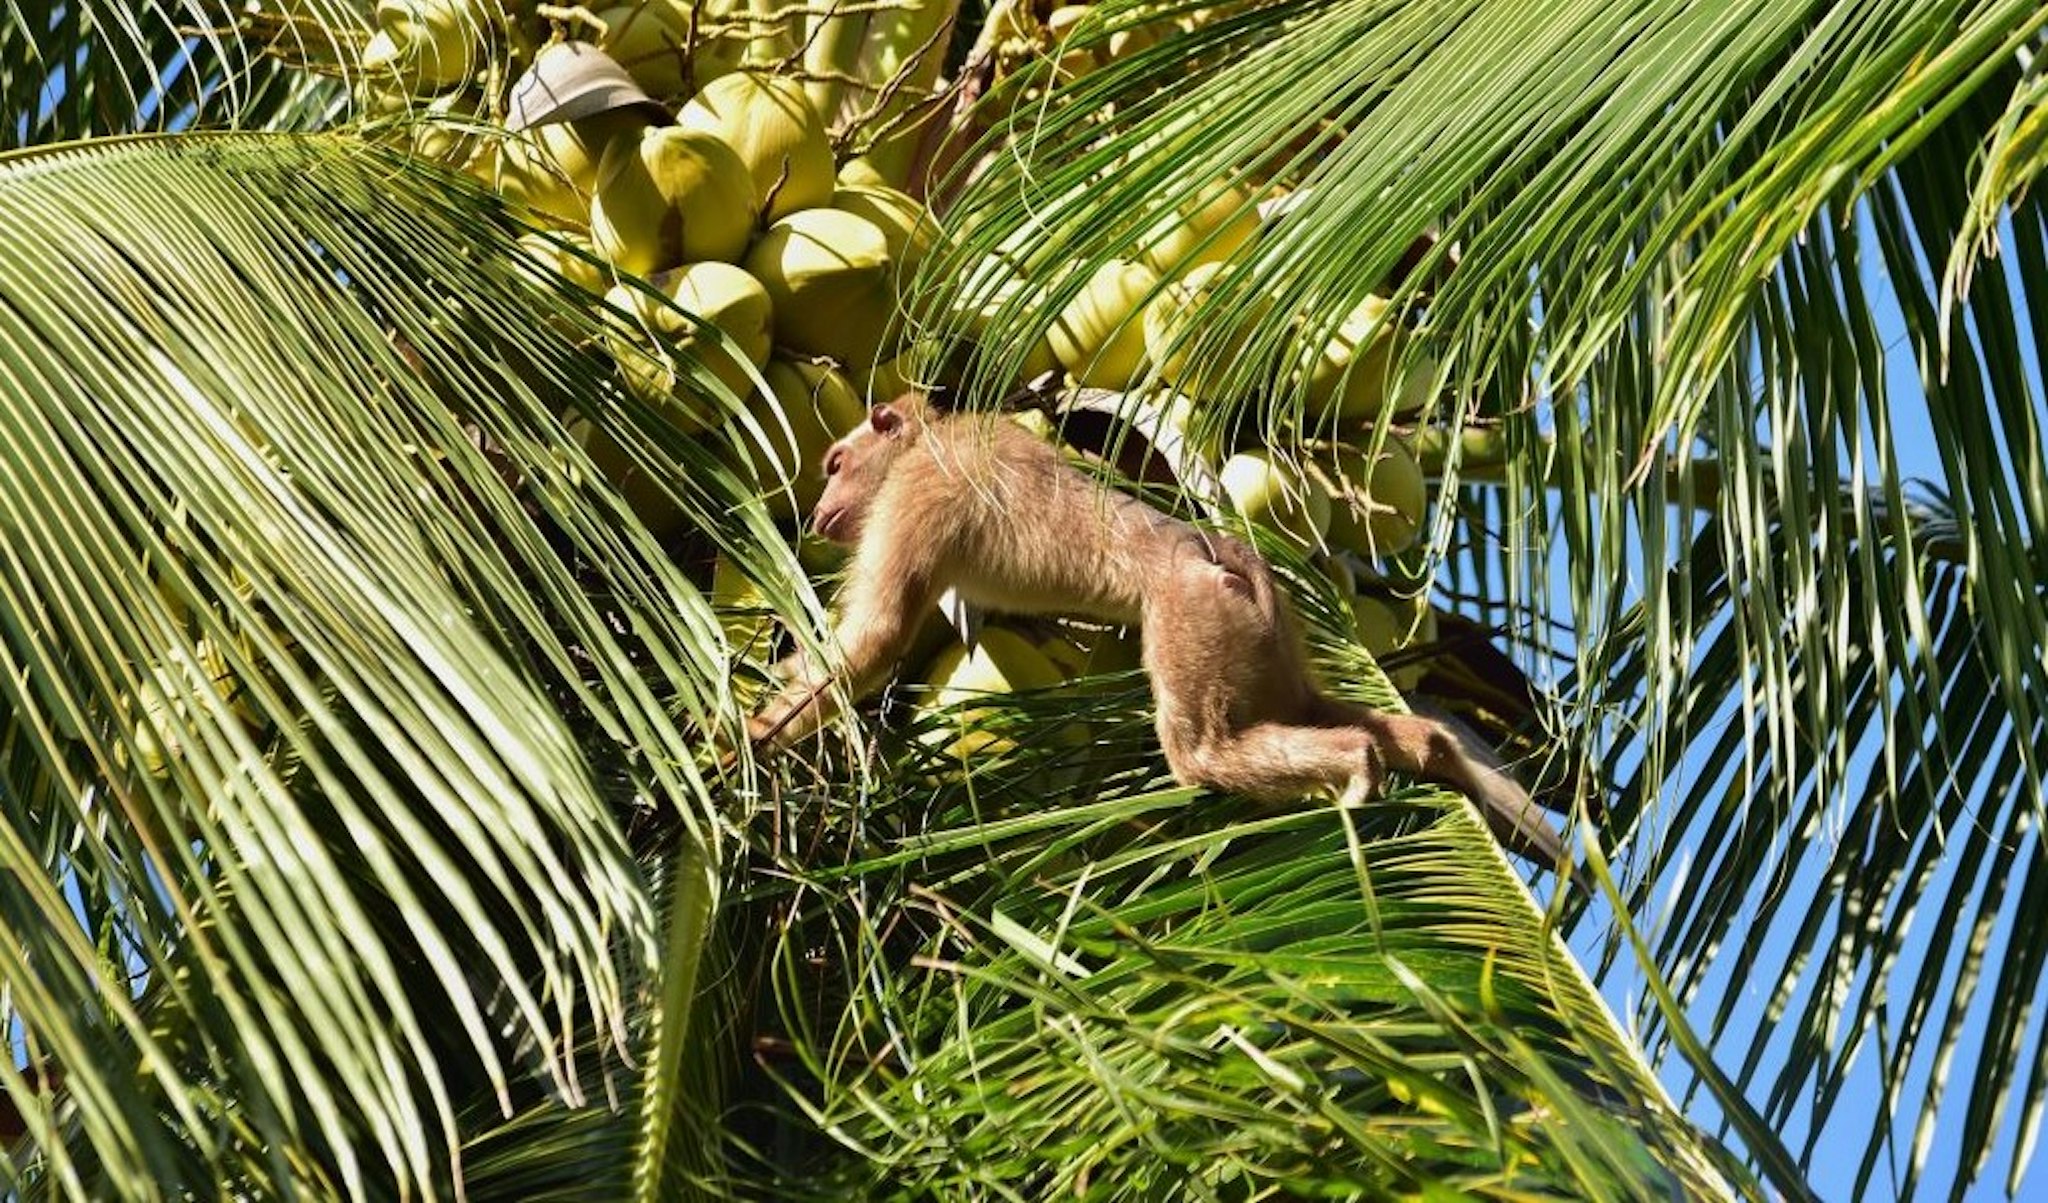 This photo taken on July 9, 2020 shows a macaque monkey climbing up a palm tree to knock down coconuts for a man to collect them in Berapea village near Narathiwat in southern Thailand. - Animal rights campaigner PETA released videos in early July of monkey "slaves" picking coconuts in Thailand, which has led several British retailers to ban the products. Thai coconut farmers have denied mistreating the macaques. (Photo by Madaree TOHLALA / AFP) (Photo by